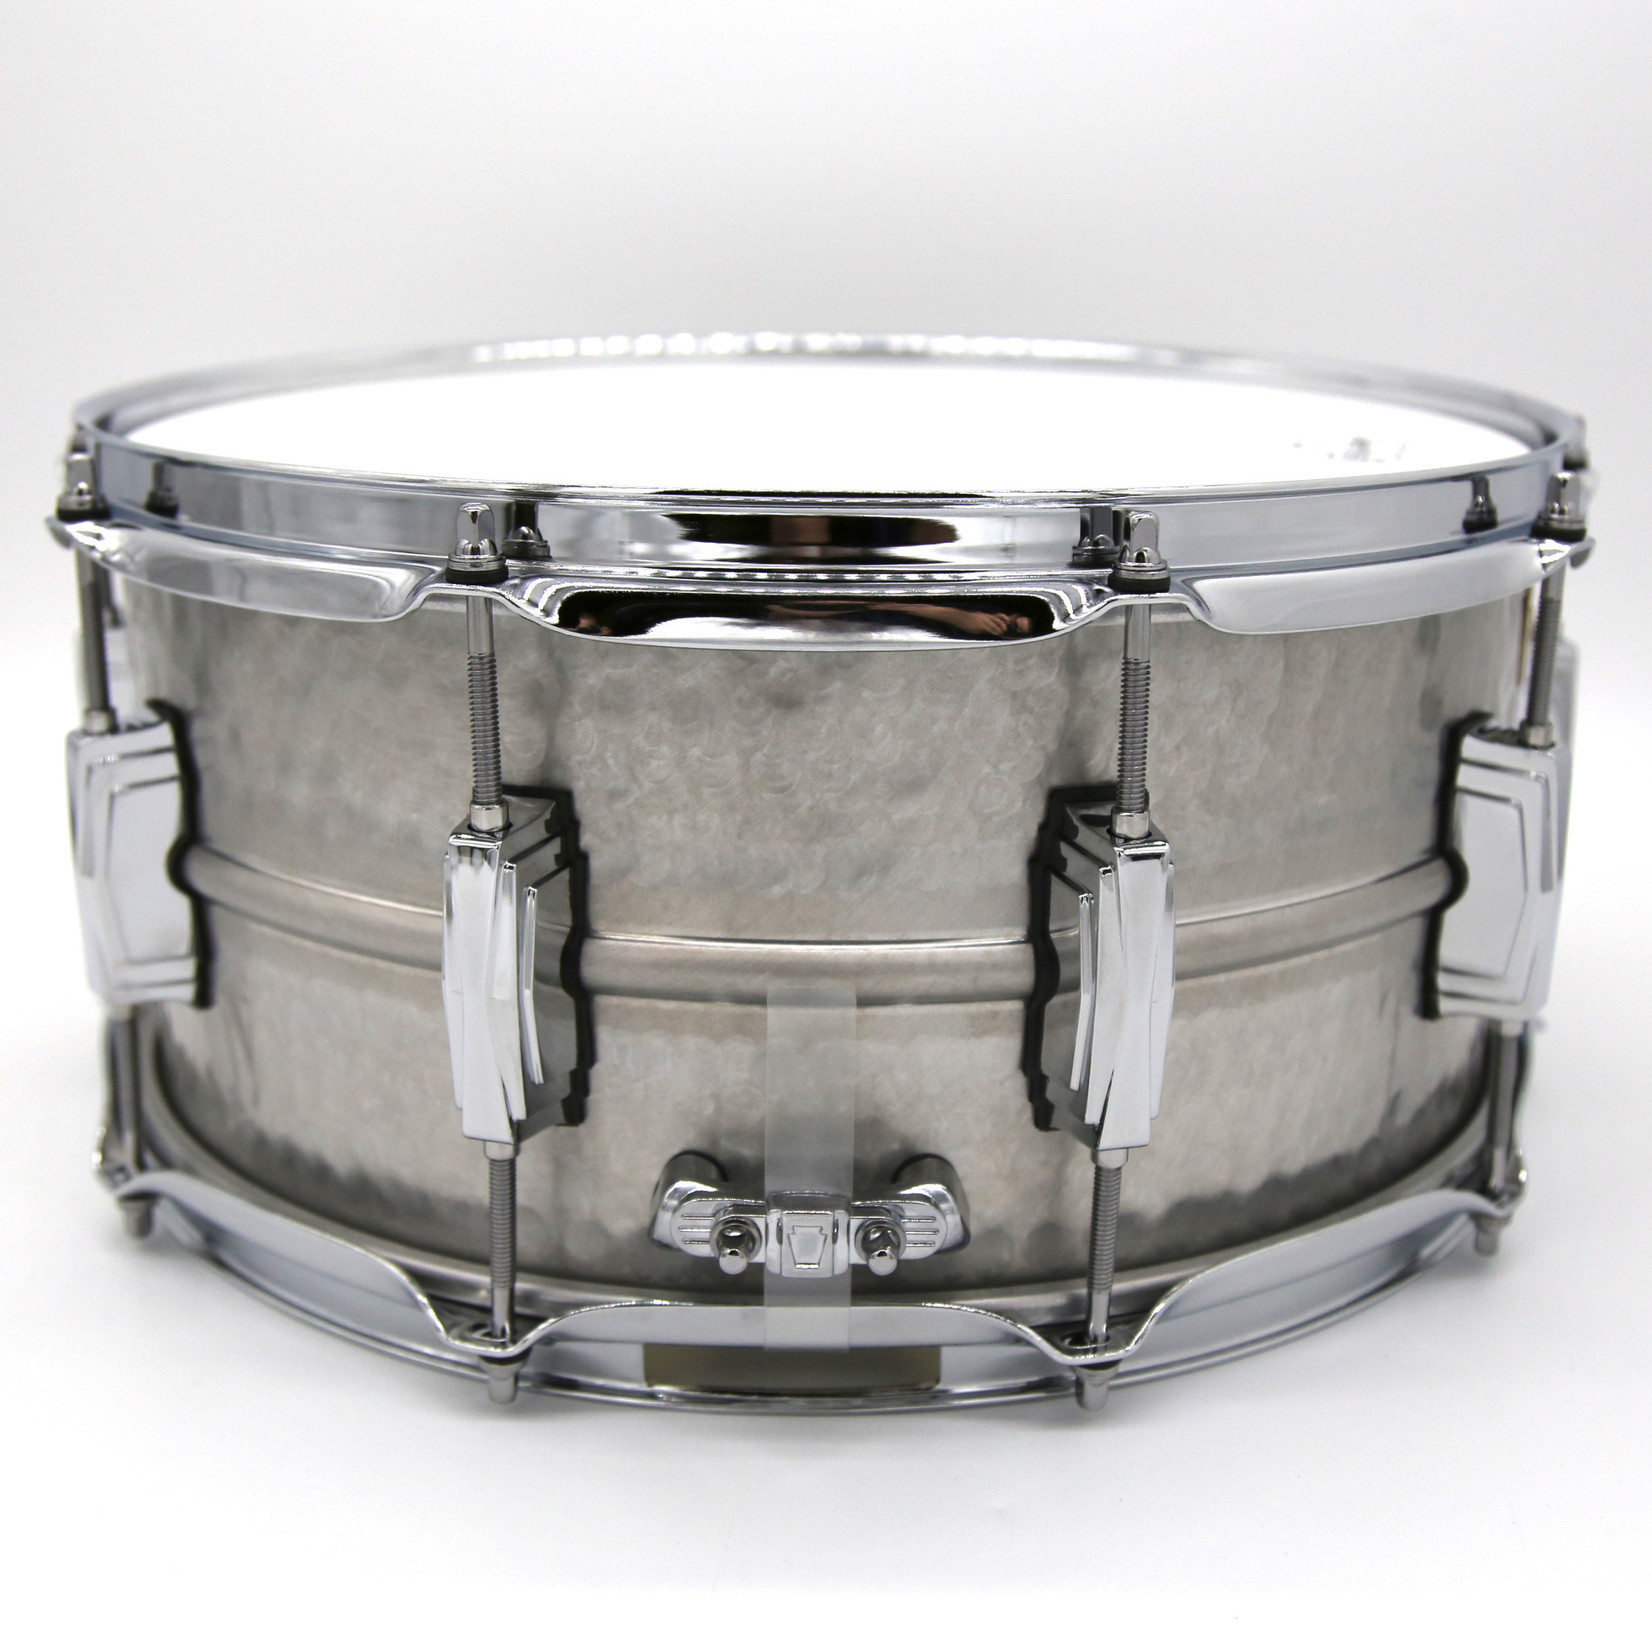 Ludwig Ludwig 6.5x14" Acrophonic Hammered Snare Drum LA405K